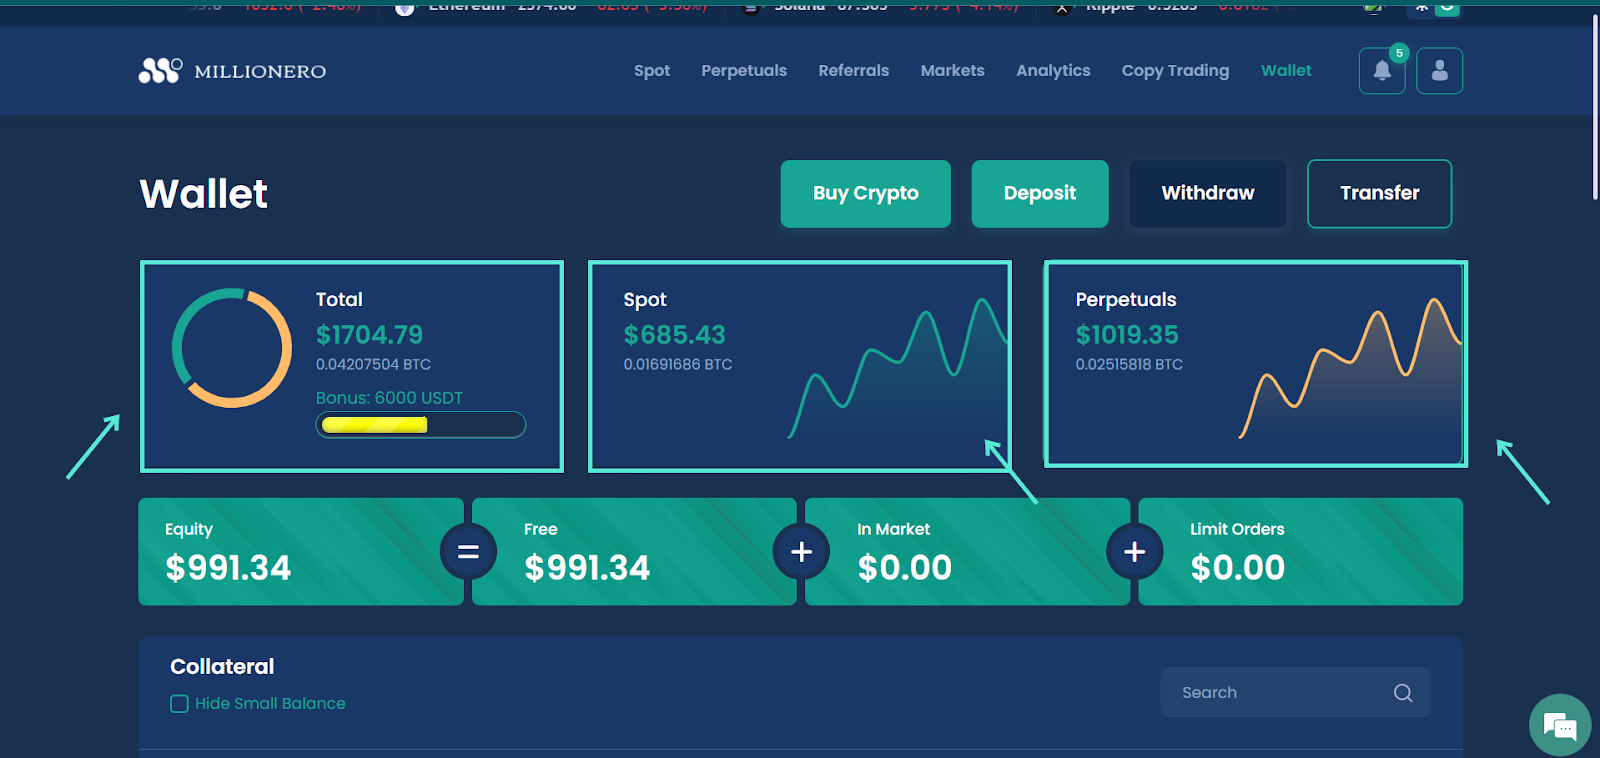 crypto trading on Millionero: Your total wallet balances available for crypto withdrawals 